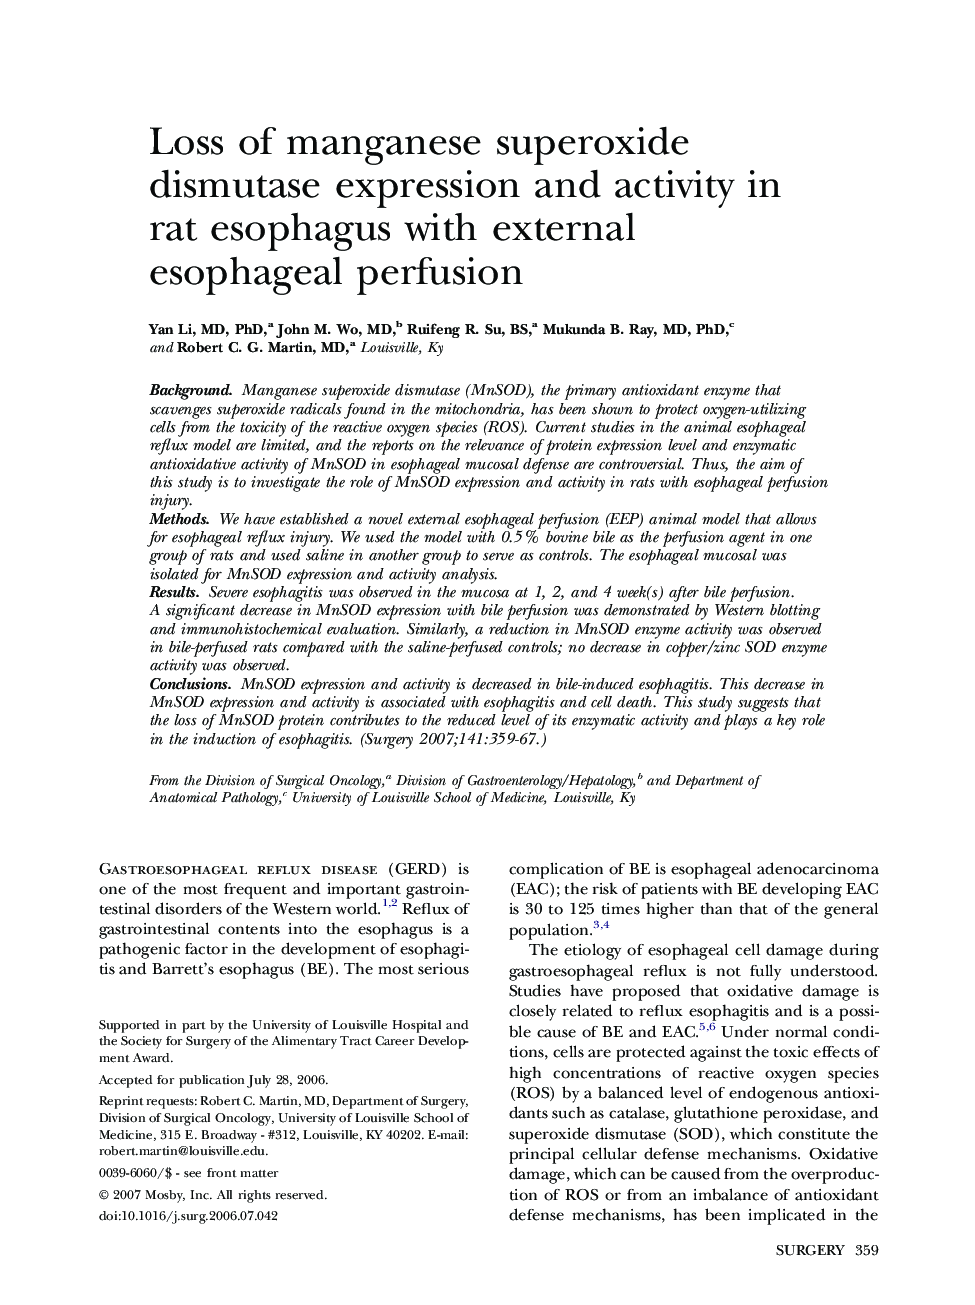 Loss of manganese superoxide dismutase expression and activity in rat esophagus with external esophageal perfusion 